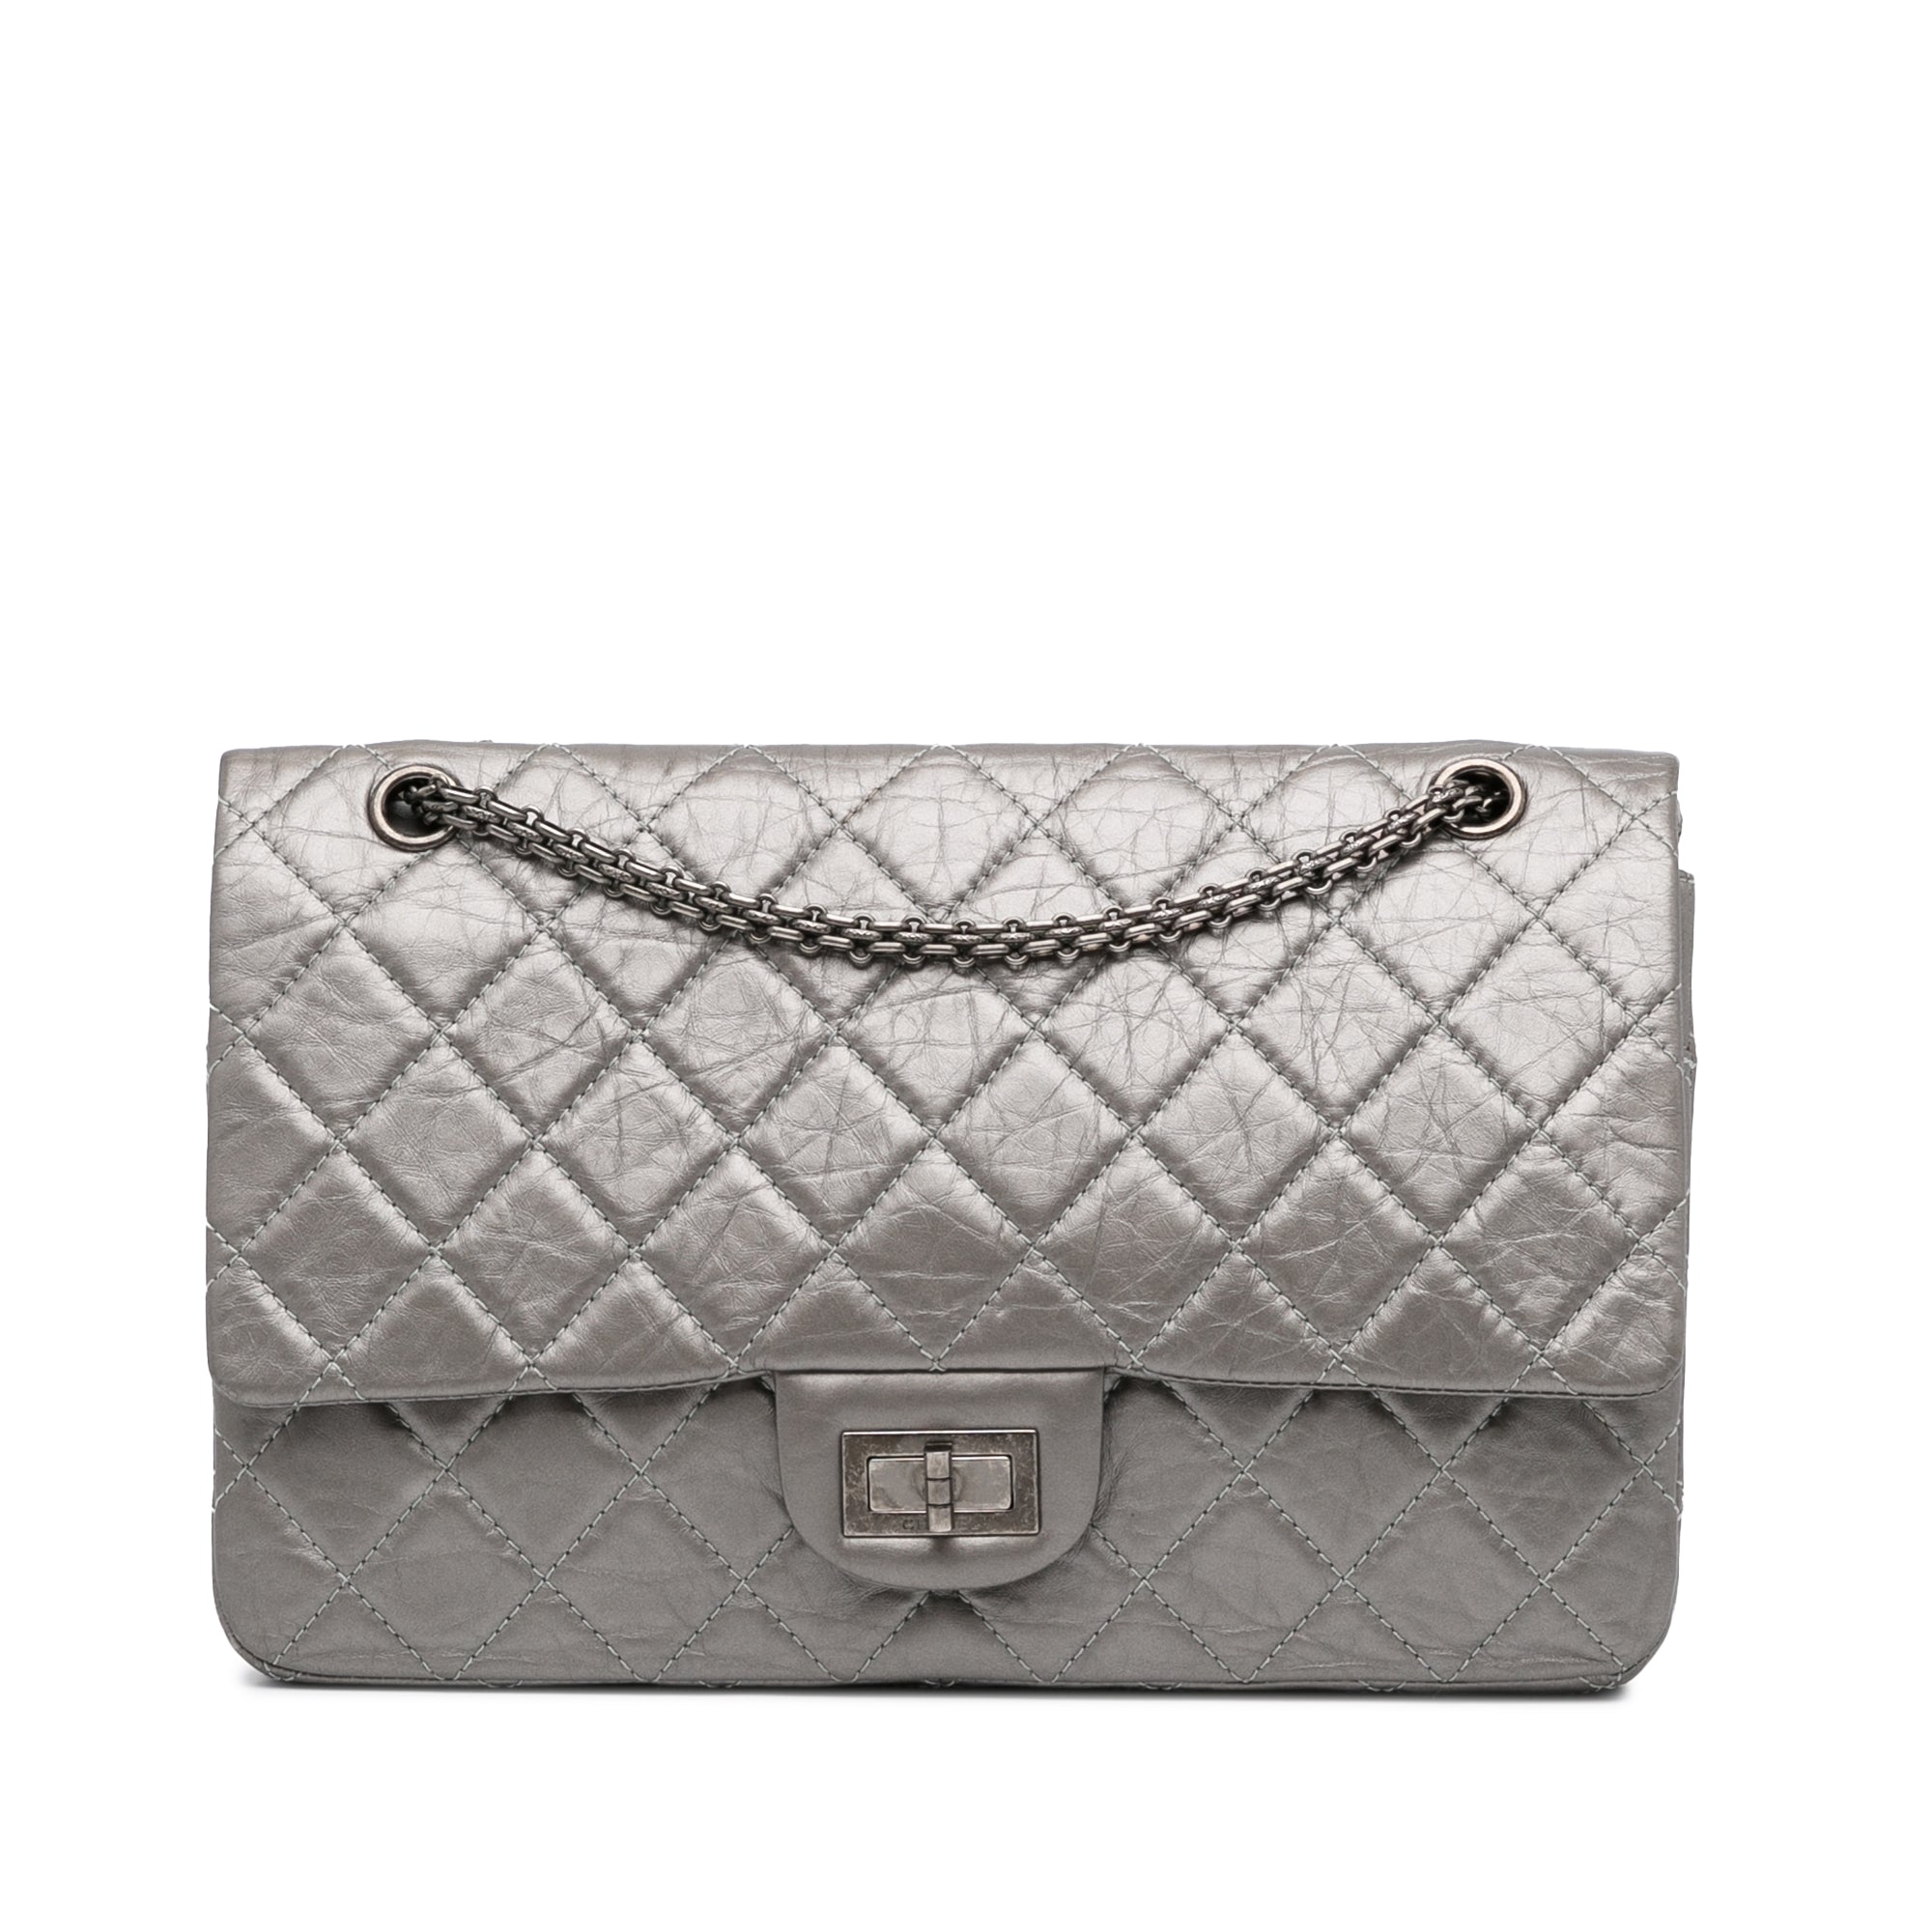 Chanel - Authenticated 2.55 Purse - Leather Silver Plain for Women, Very Good Condition